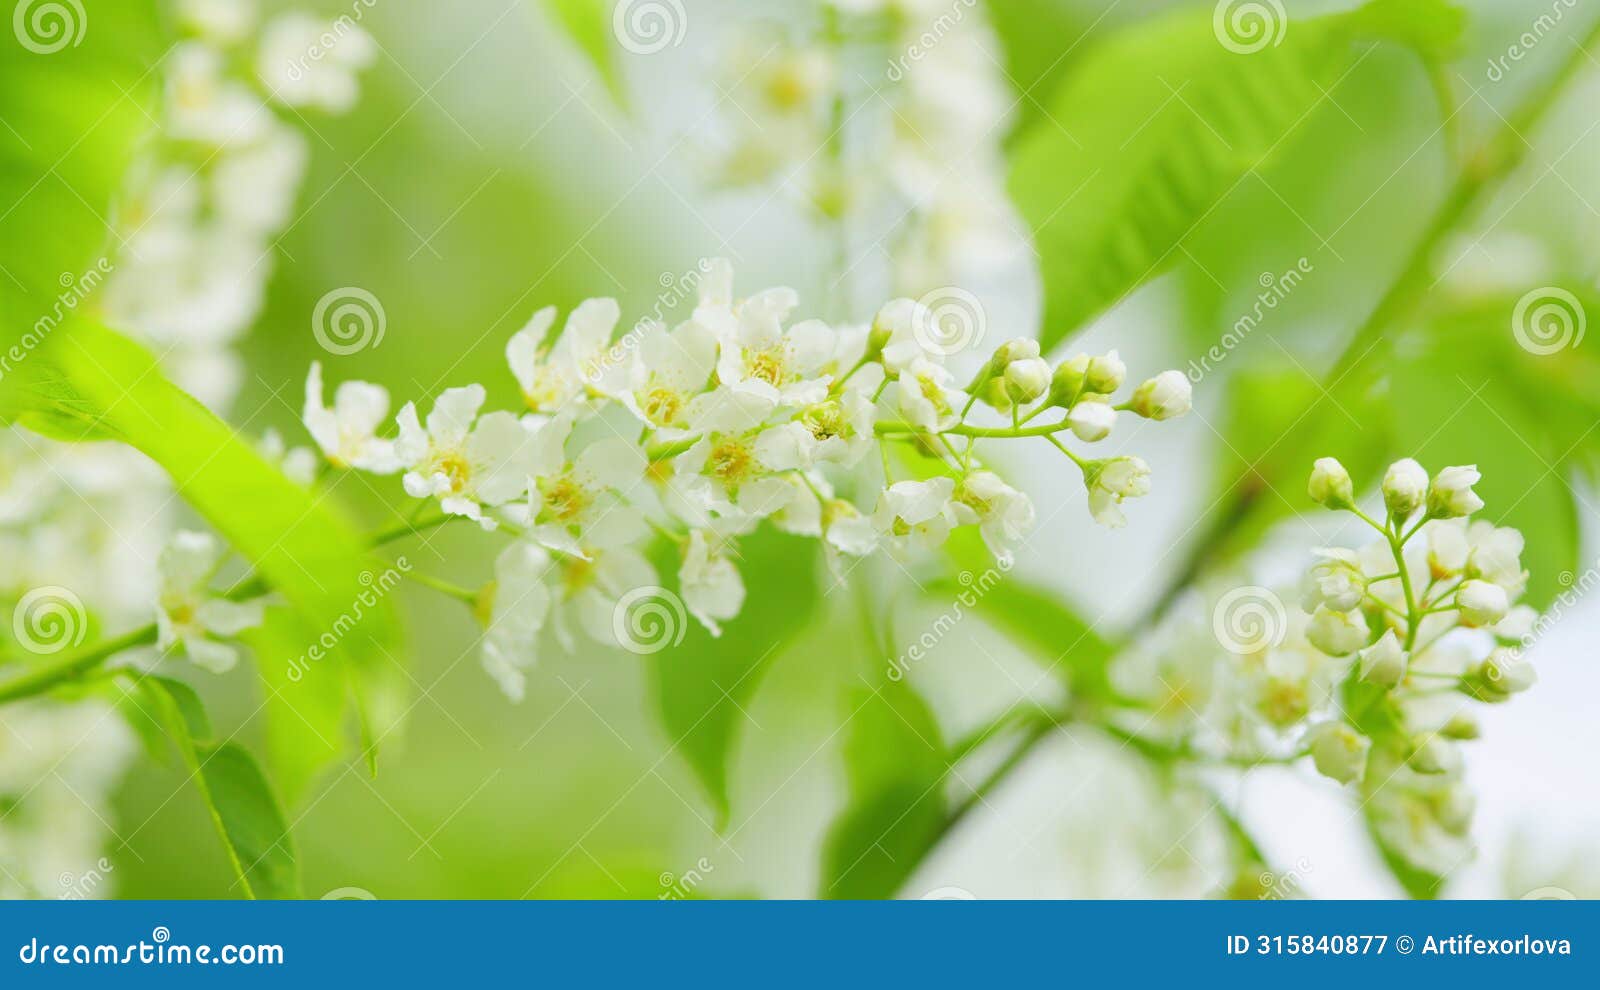 mayday tree, is a flowering plant in the rose family rosaceae. mass flowering. slow motion.